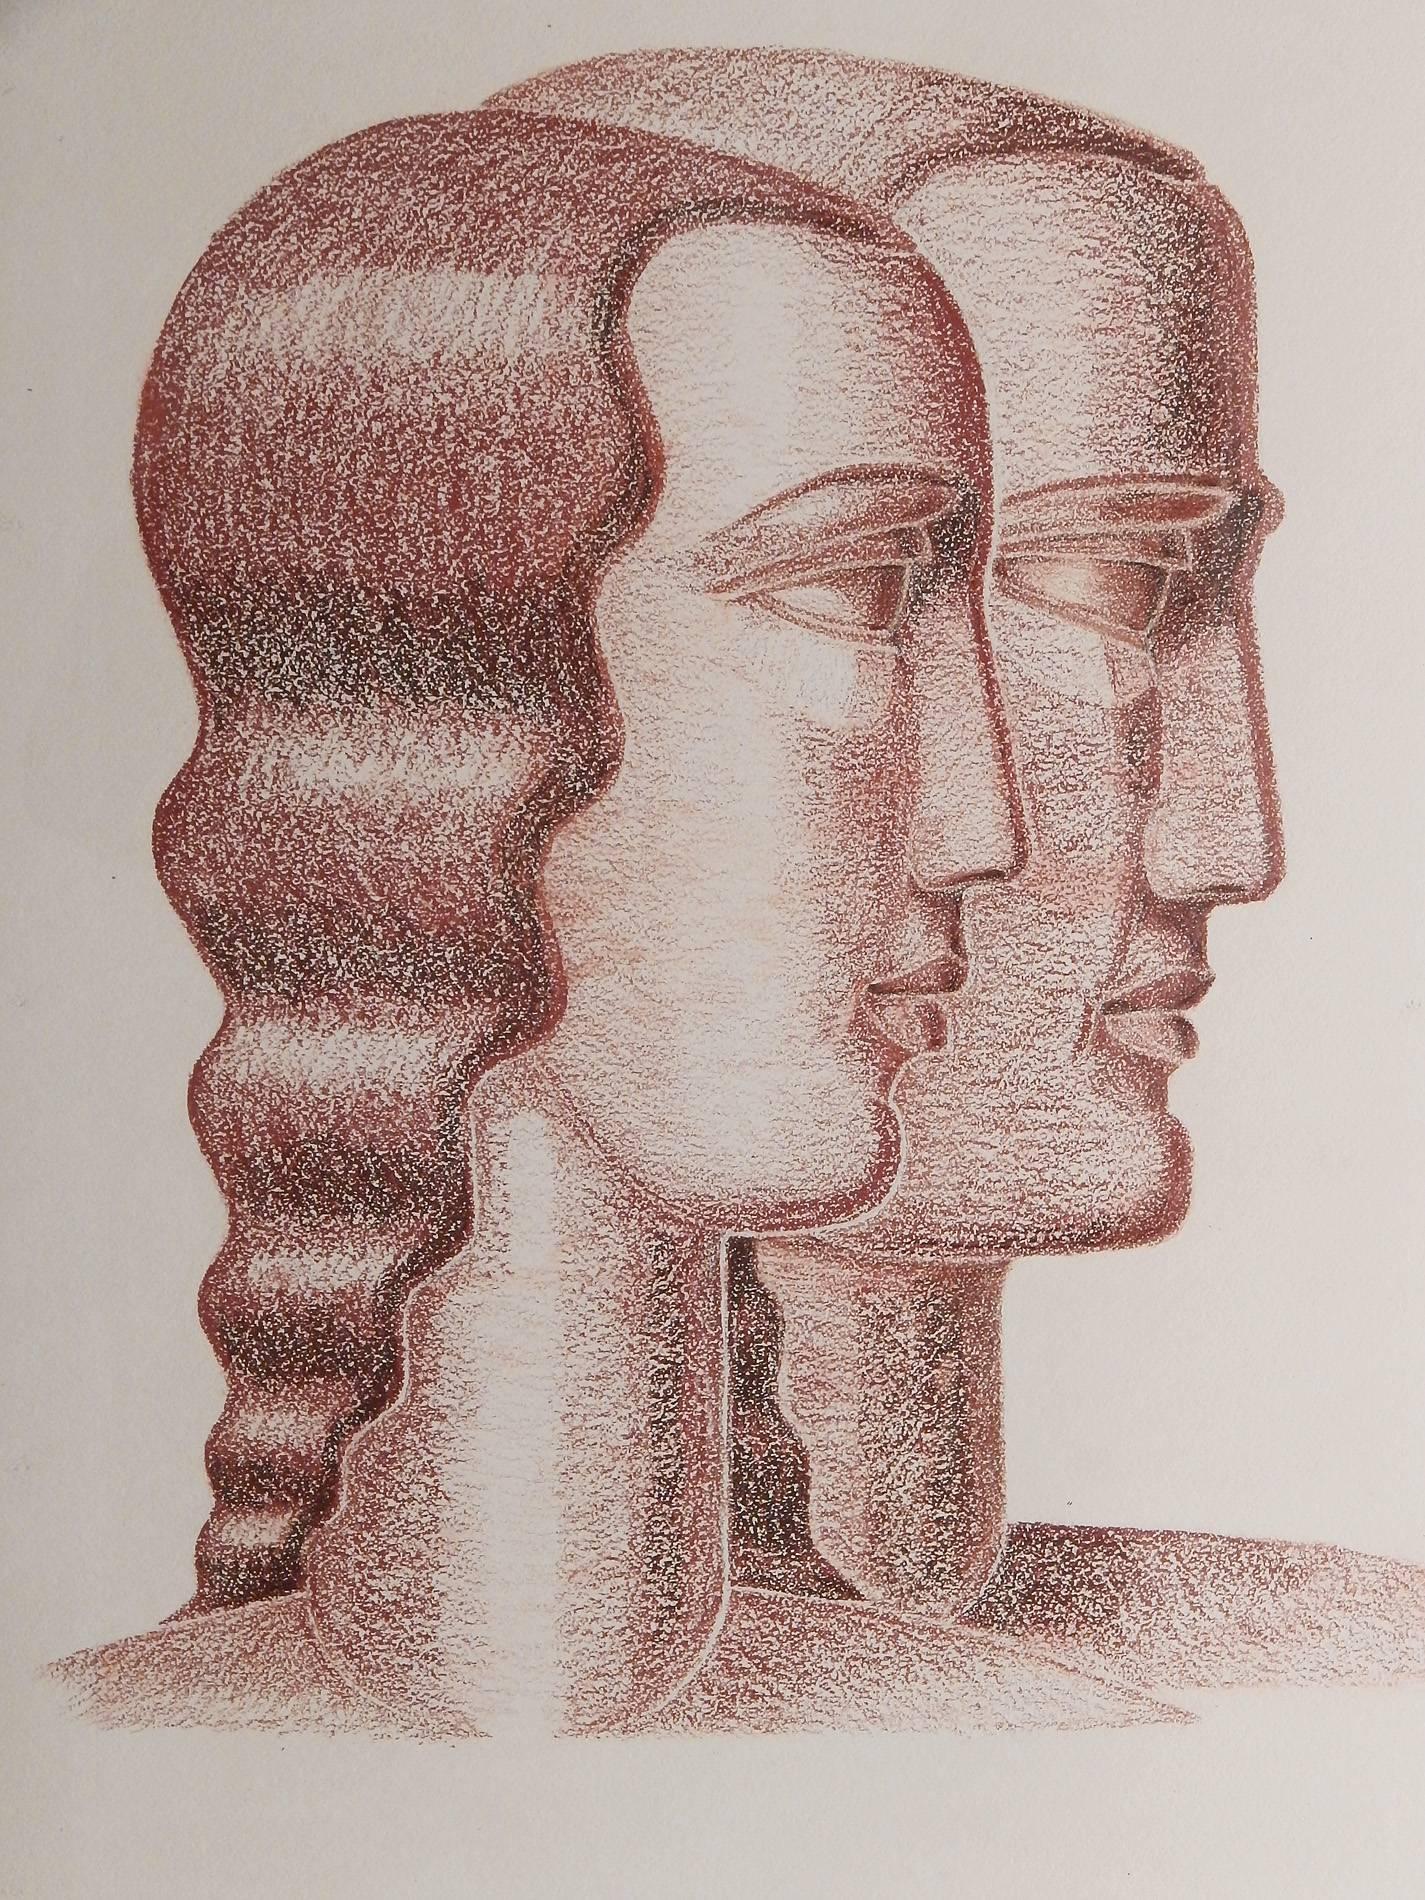 Solid and monumental in feeling, this quintessentially Art Deco drawing in a lovely sanguine hue by Peterpaul Ott depicts female and male heads, staring impassively ahead, with columnar necks and strong profiles, as if they are carved from marble or